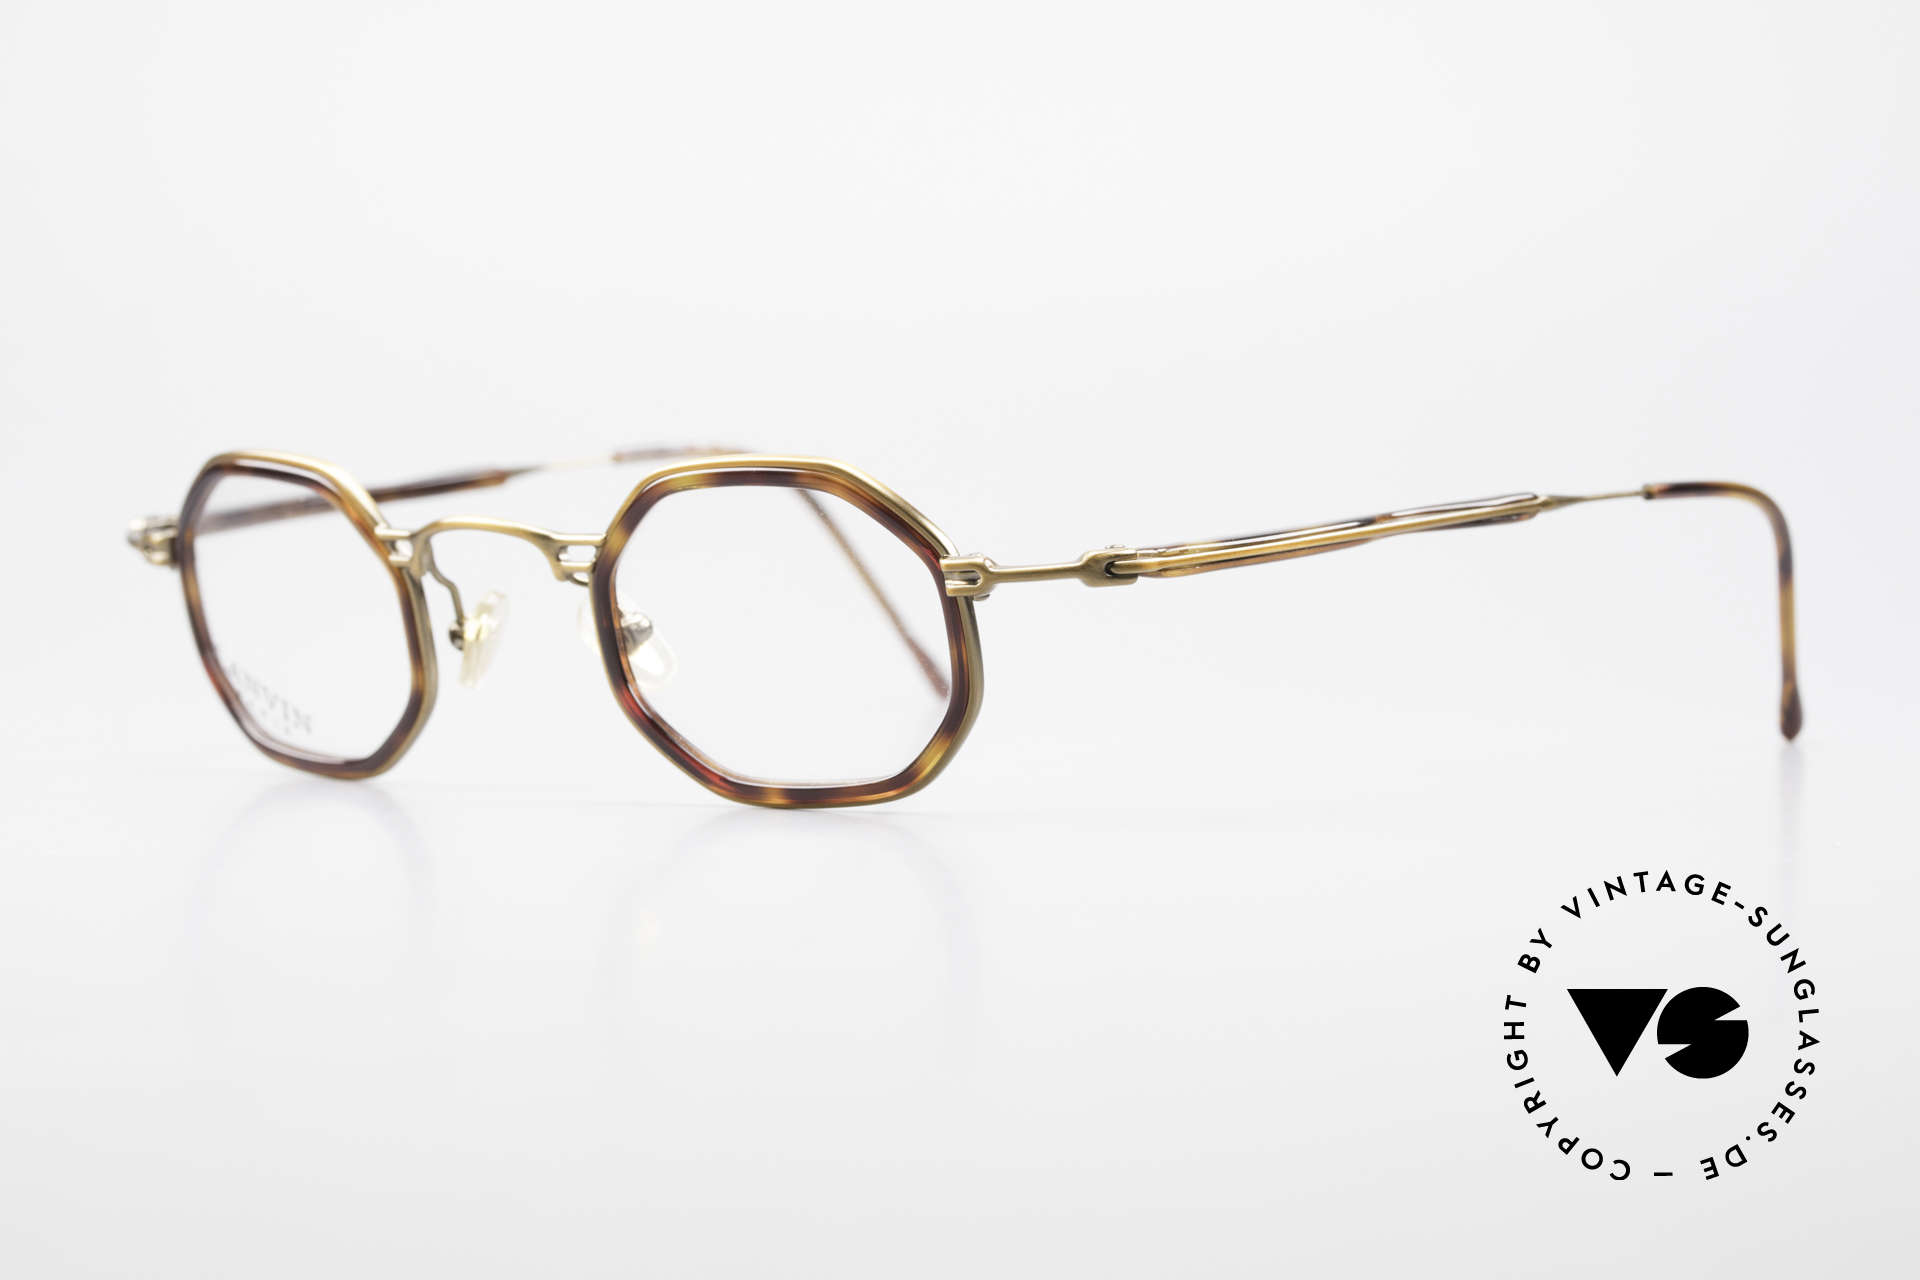 Lanvin 1222 Octagonal Combi Glasses 90's, top-notch 90s craftsmanship; made in France, Made for Men and Women